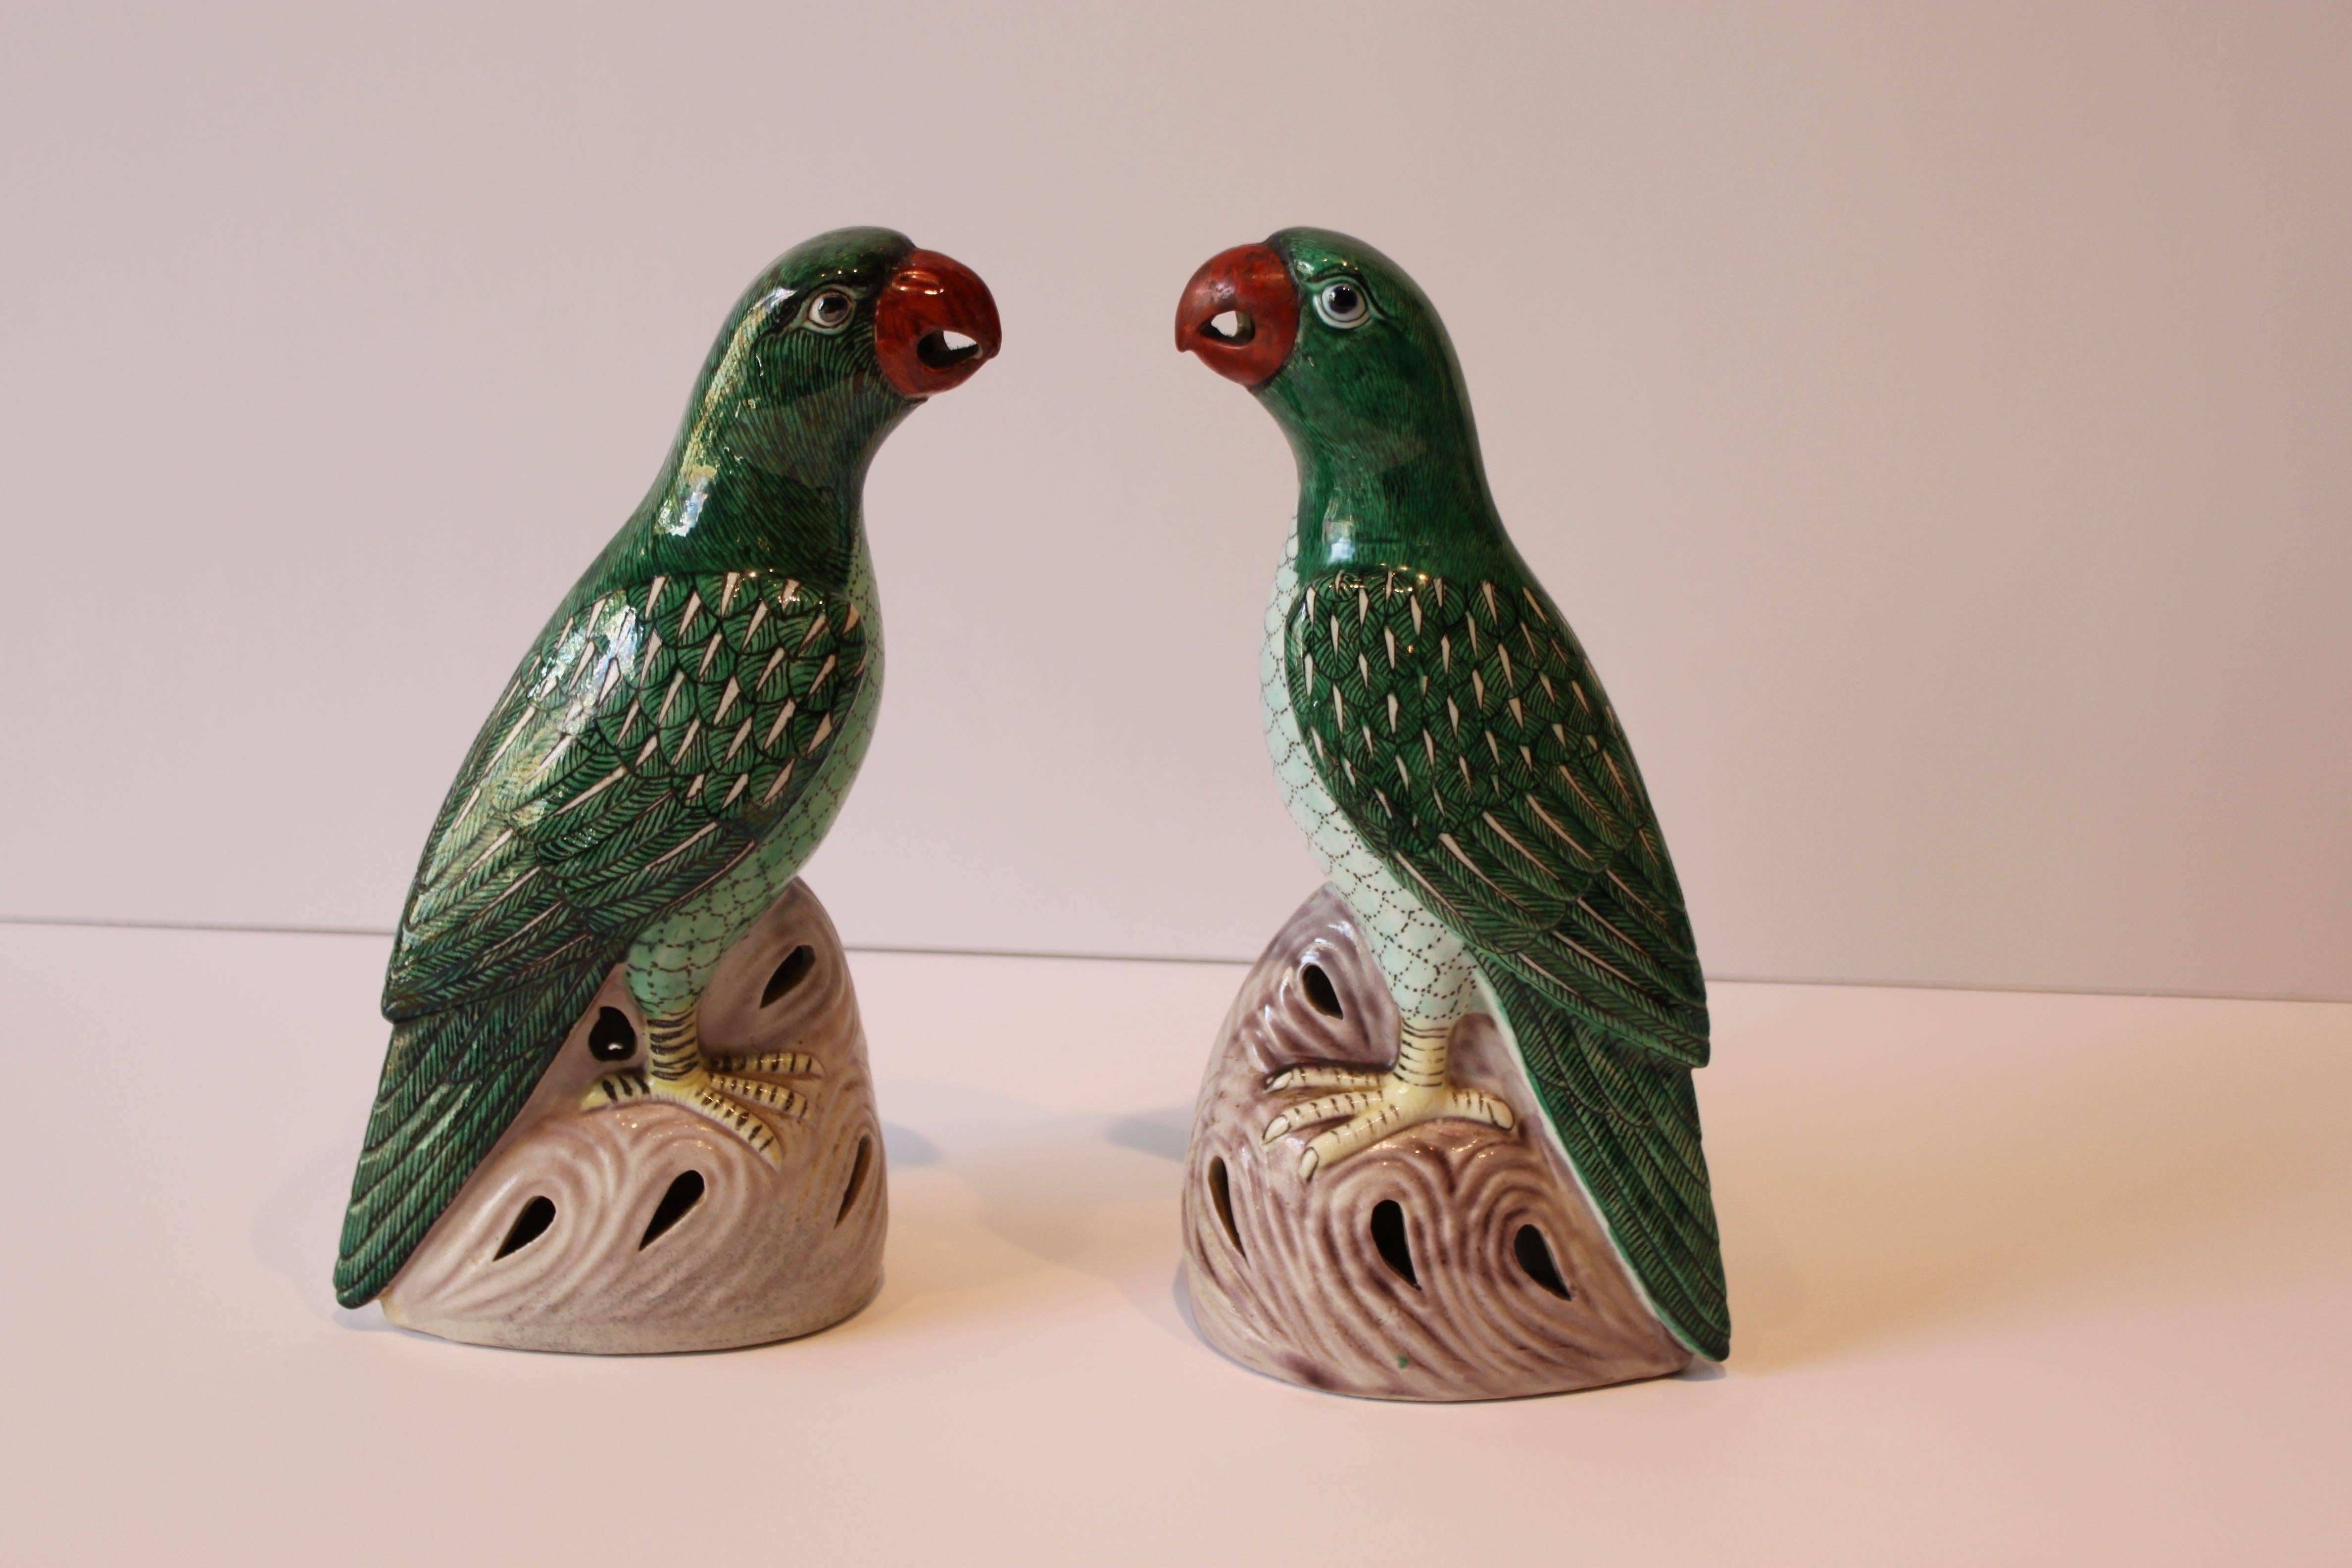 20th Century Pair of Chinese Export Famille Verte Green Hand-Painted Ceramic Parrots